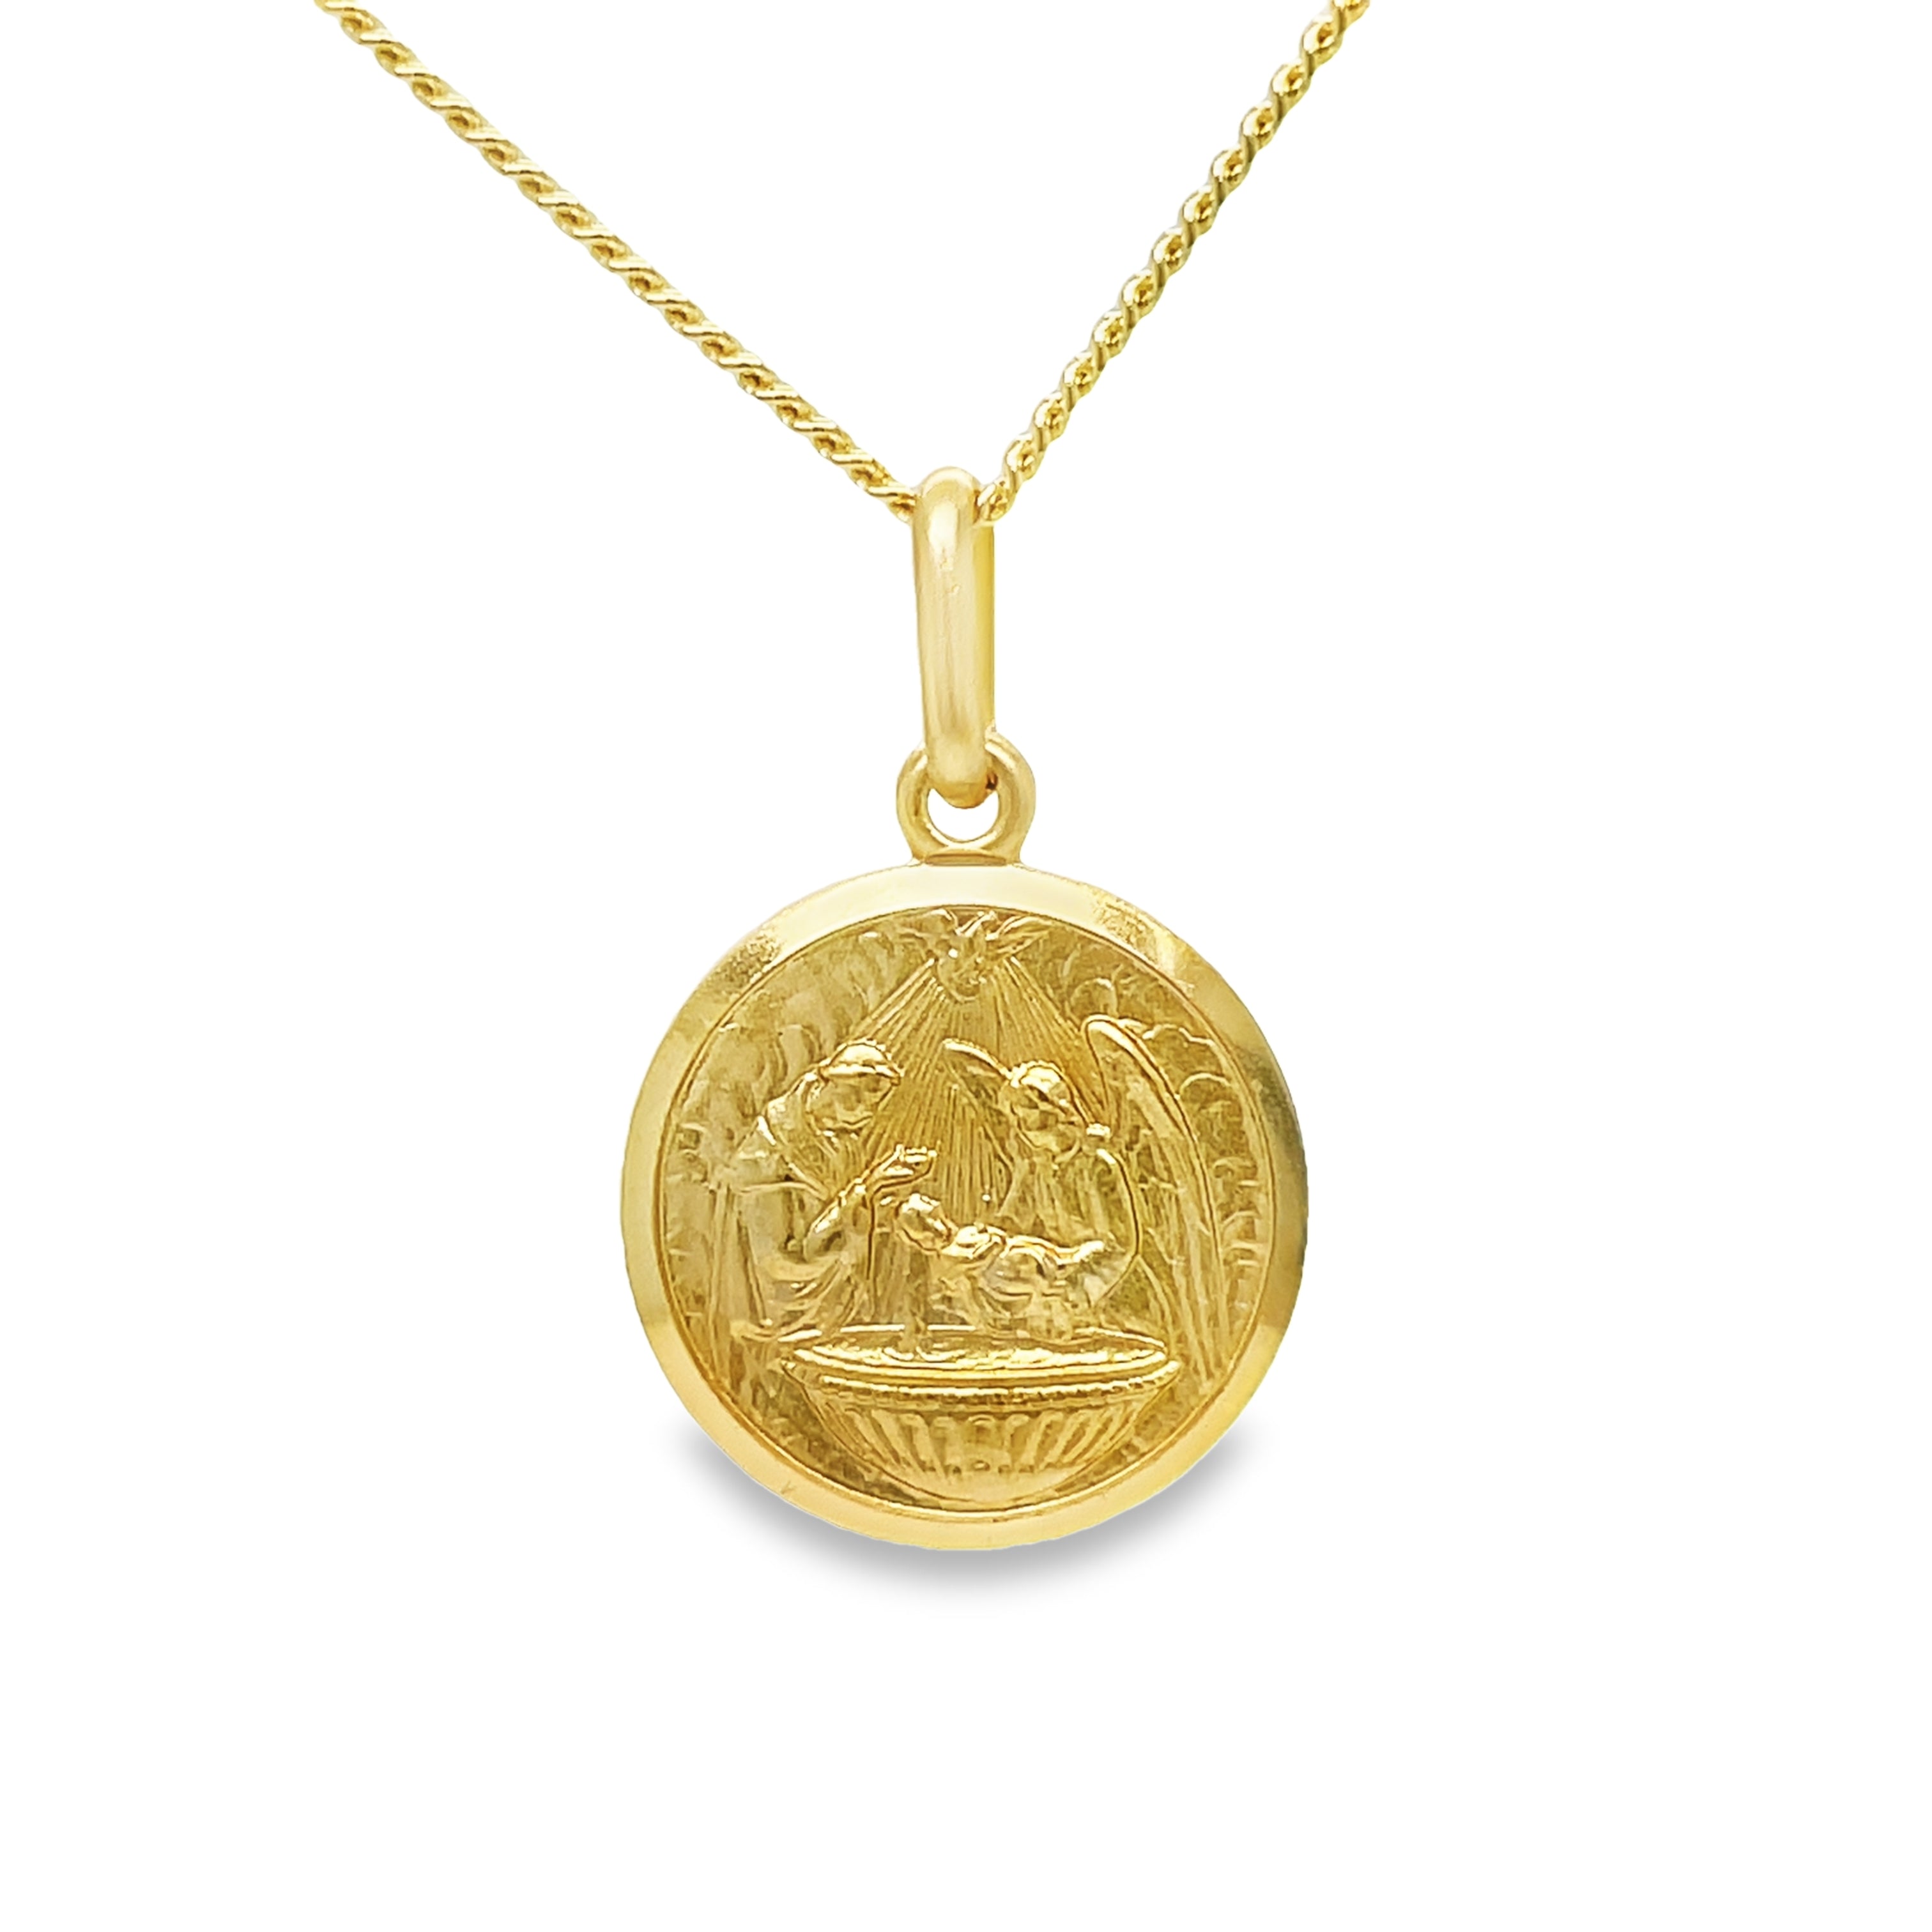 Expertly crafted from 14k Italian yellow gold, this pendant necklace features a communion medallion, known for its symbol of strength and protection. With a secure bail, the pendant measures 3/4" in length (including bail). Elevate your style and embrace the spiritual connection with this beautiful piece